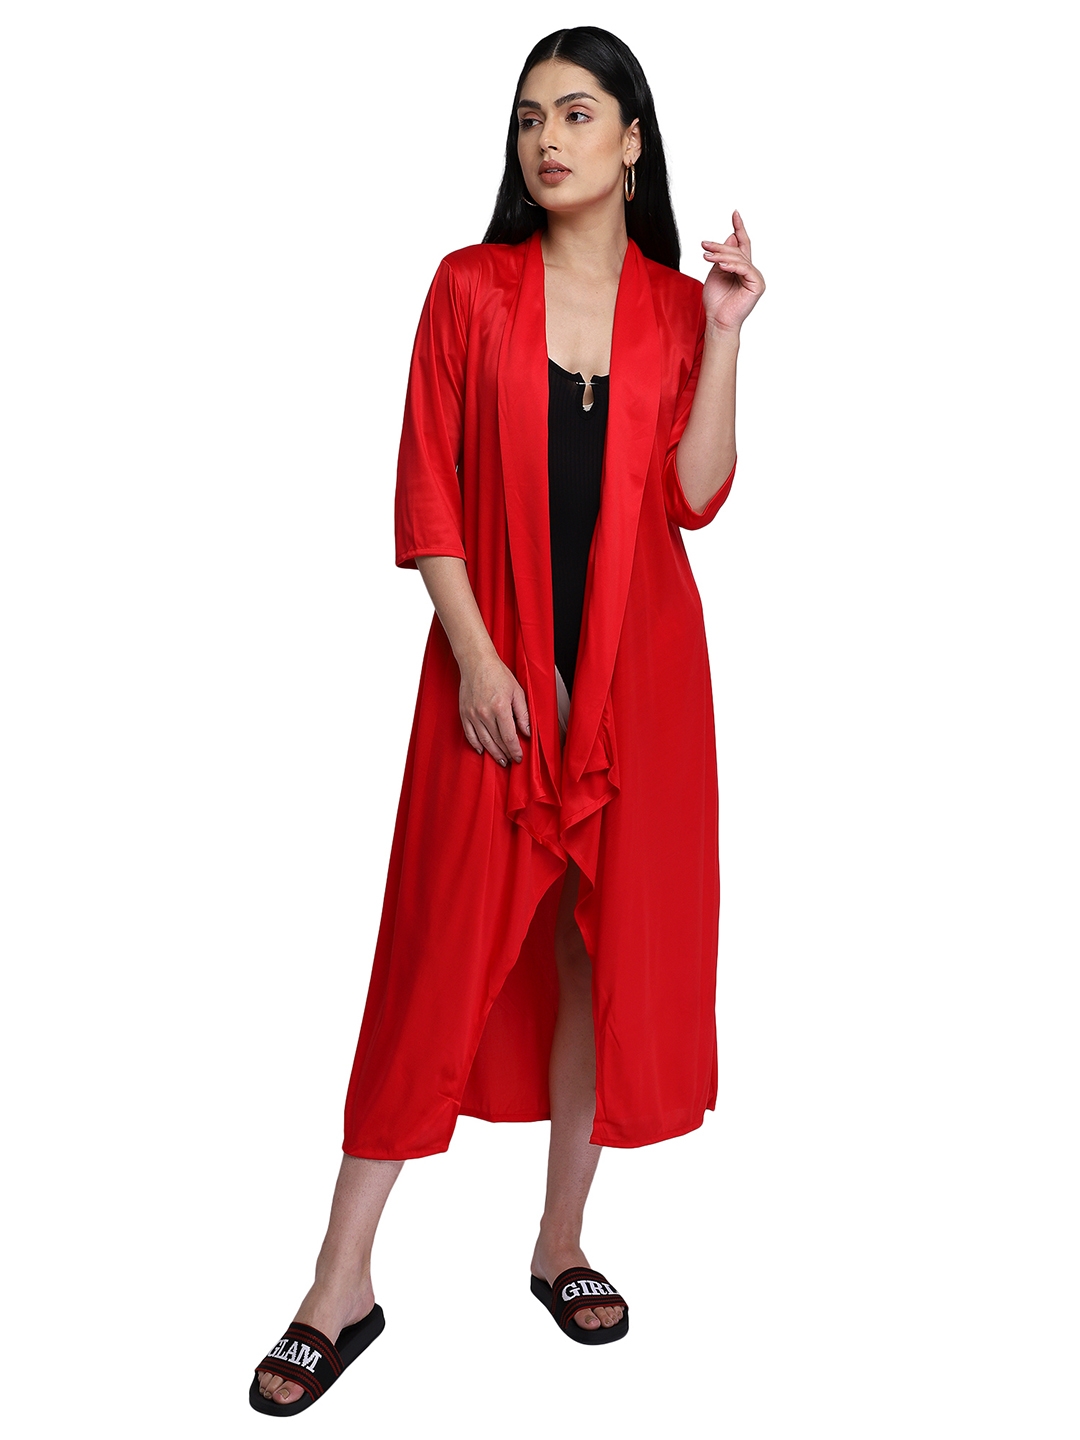 Smarty Pants | Smarty Pants women's solid red color cape cover up 0